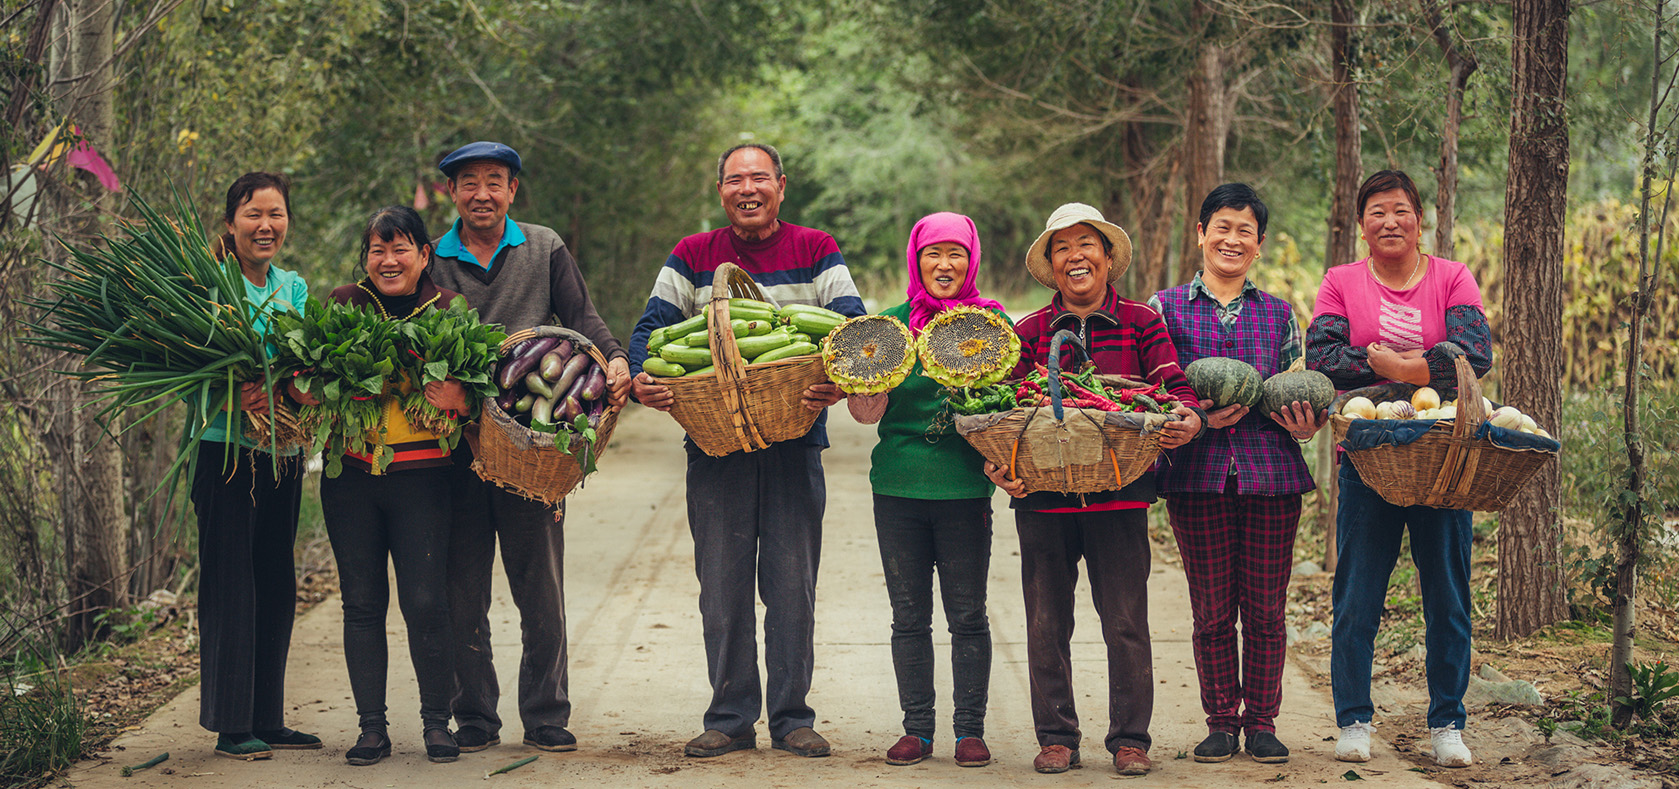 Women with their agriculture products in Guanglin Agriculture Cooperative. Photo: UN Women/Qiu Bi